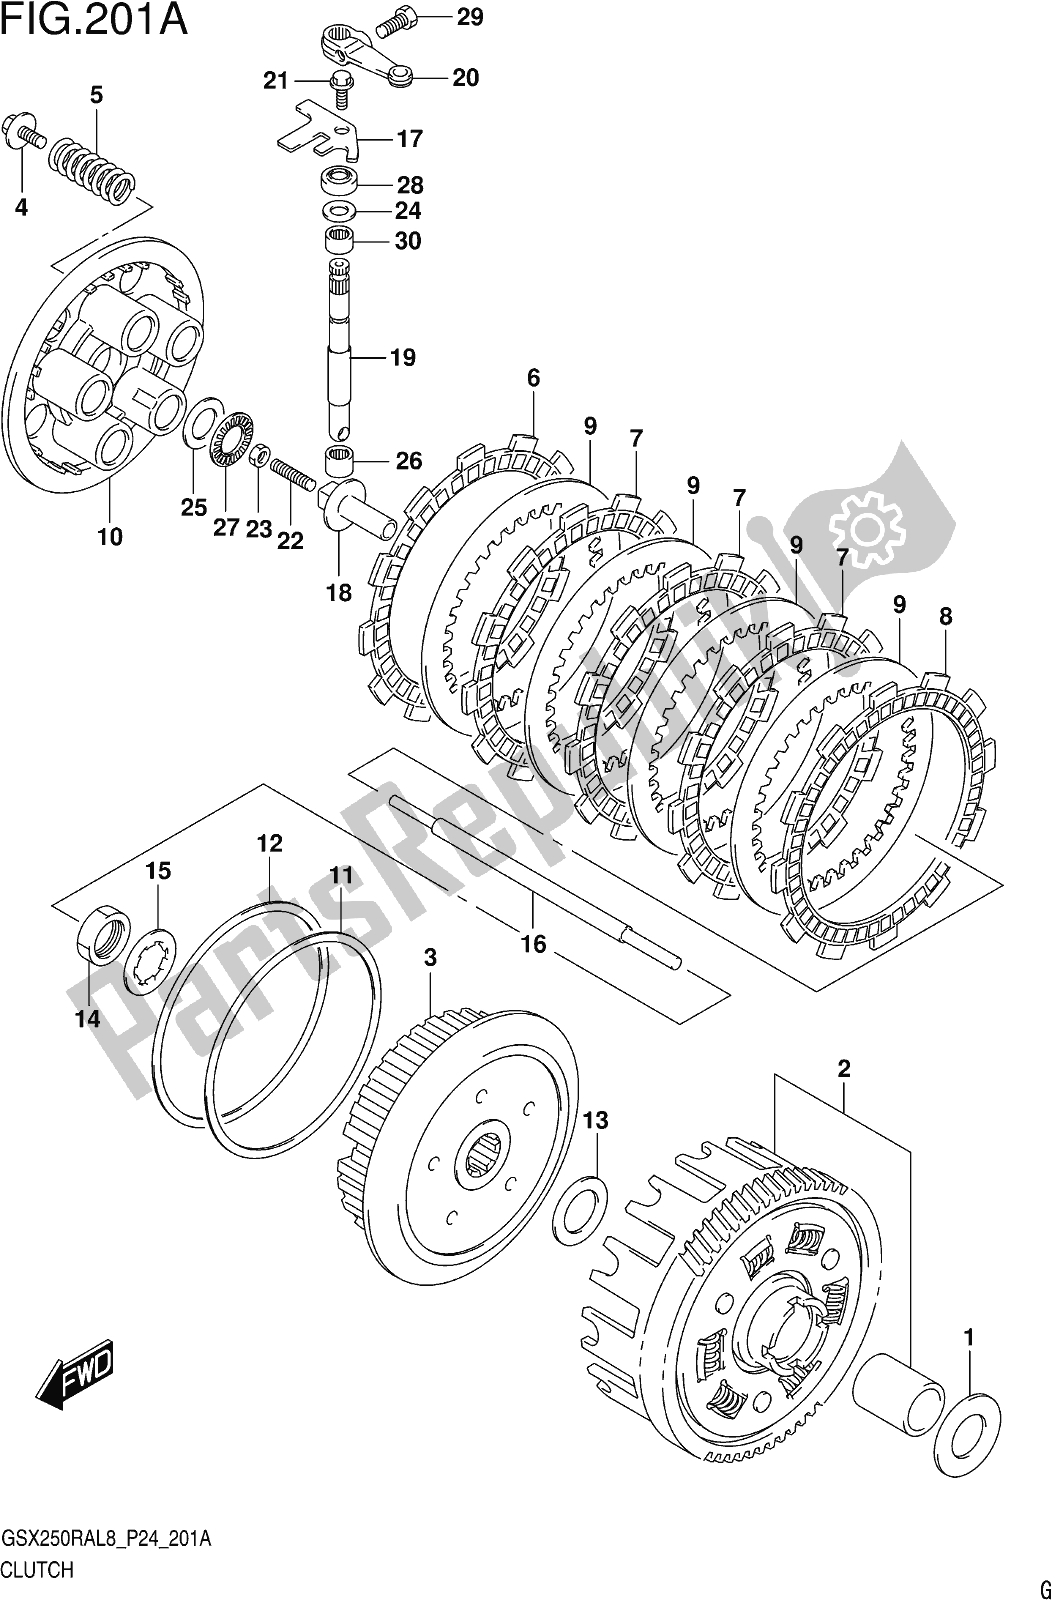 All parts for the Fig. 201a Clutch of the Suzuki GW 250 RAZ 2018